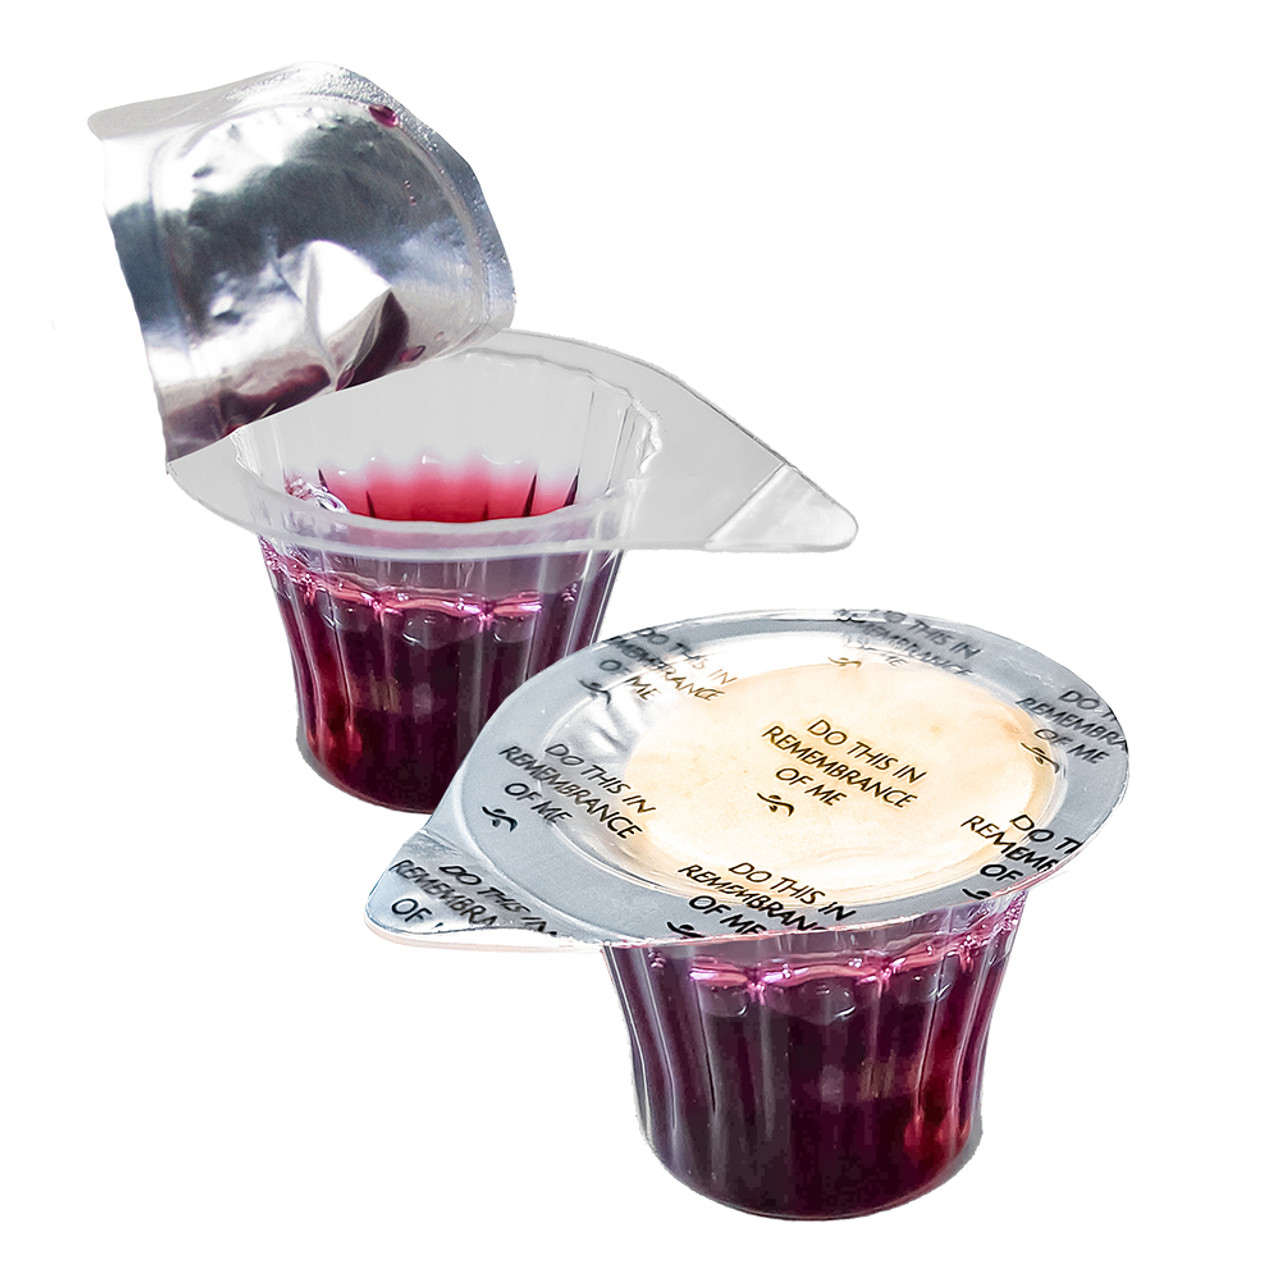 TrueVine Cup - Prefilled Communion Cups - Wheat Wafer & Juice Sets (Box of  500)